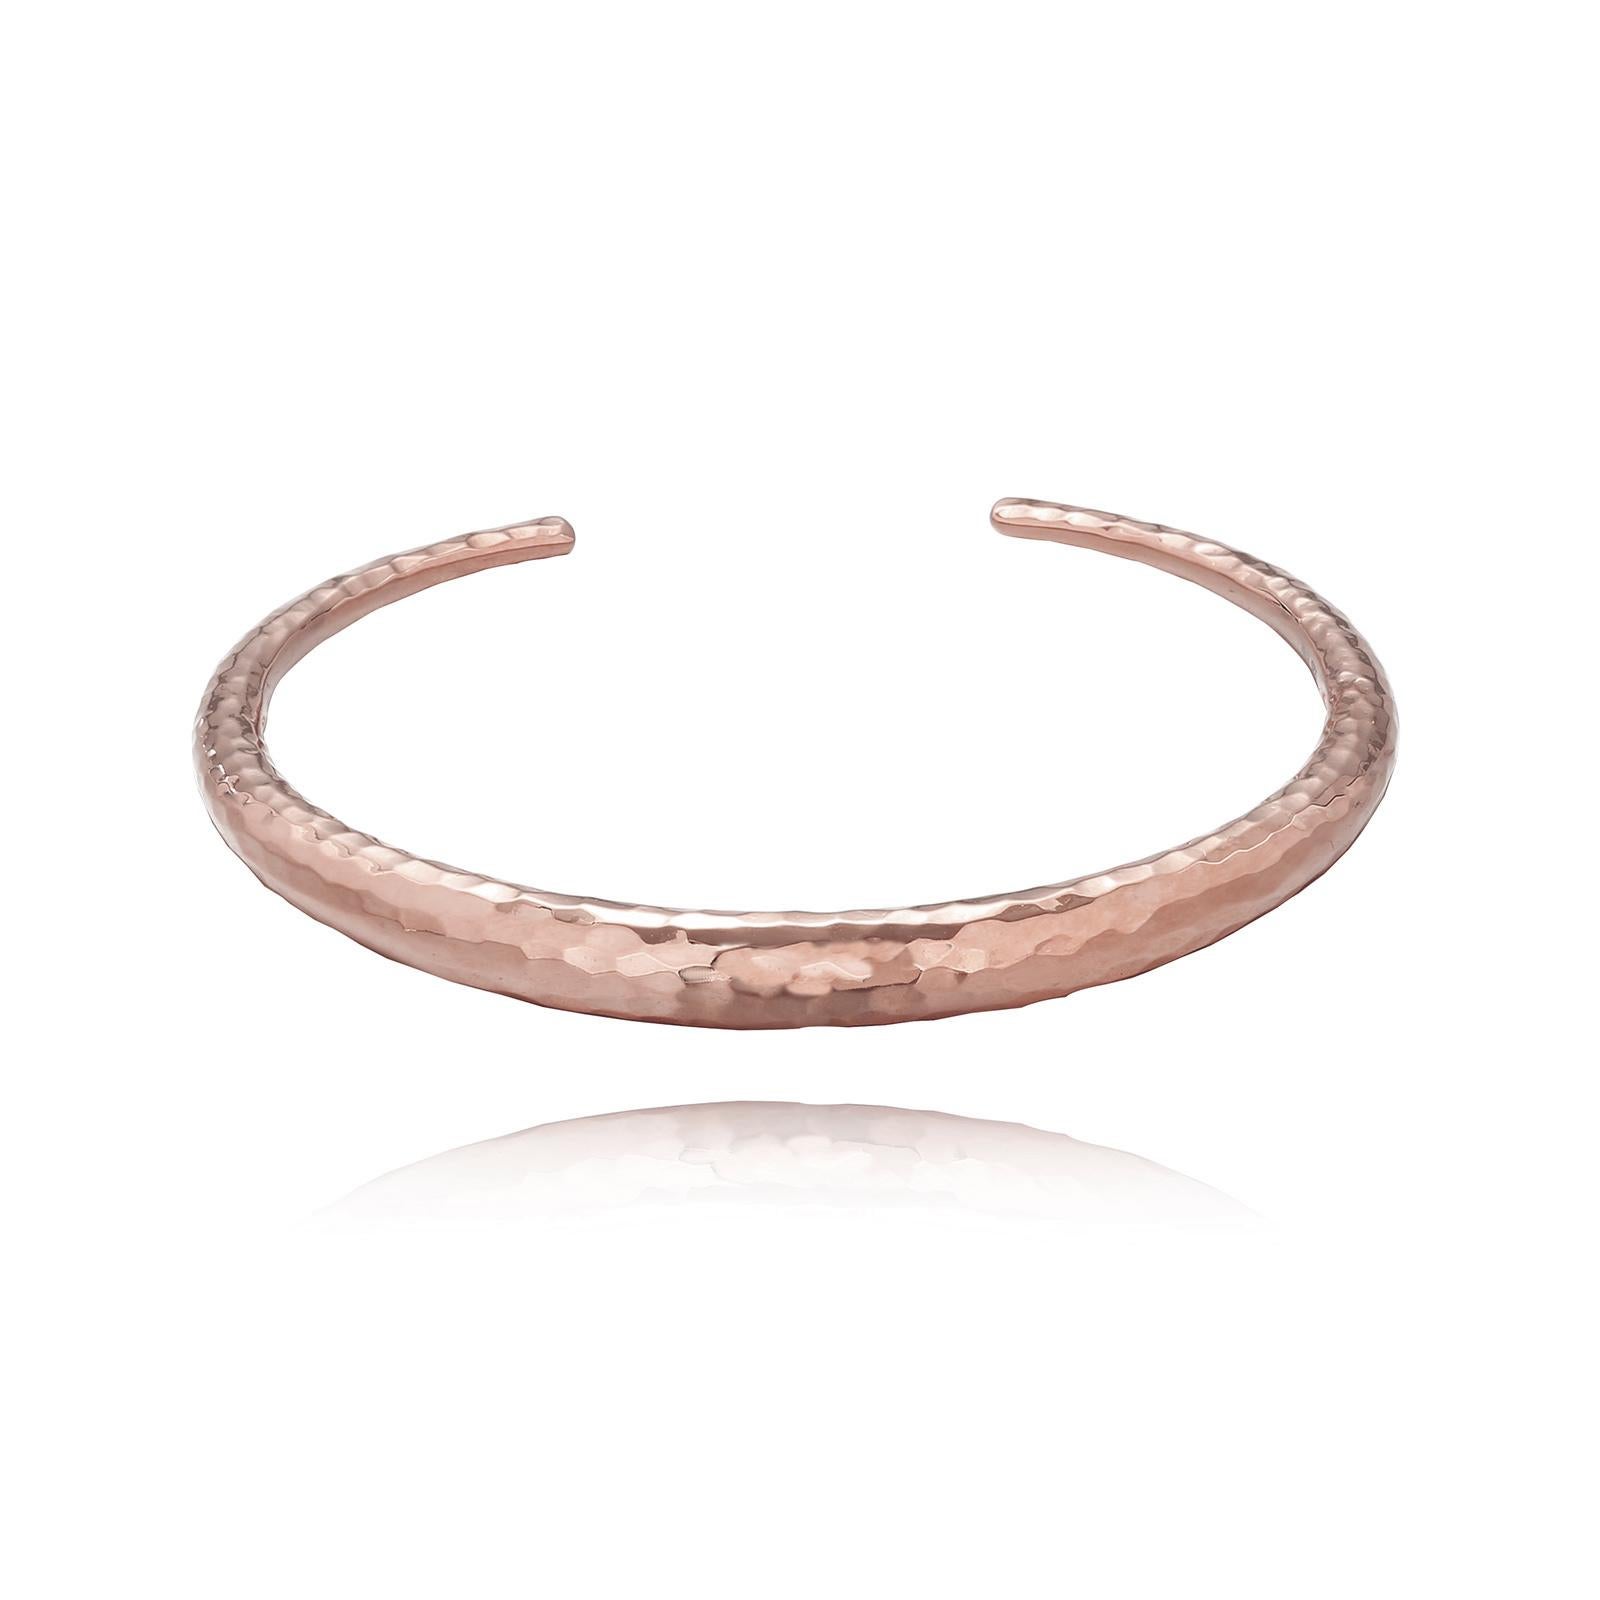 We are fierce and bold. This hammered dome cuff is perfectly transcendable. Wear on its own day and night, or mix and match and stack with other pieces.   .925 sterling silver base. Also available in sterling silver and 24k rose gold vermeil. 
